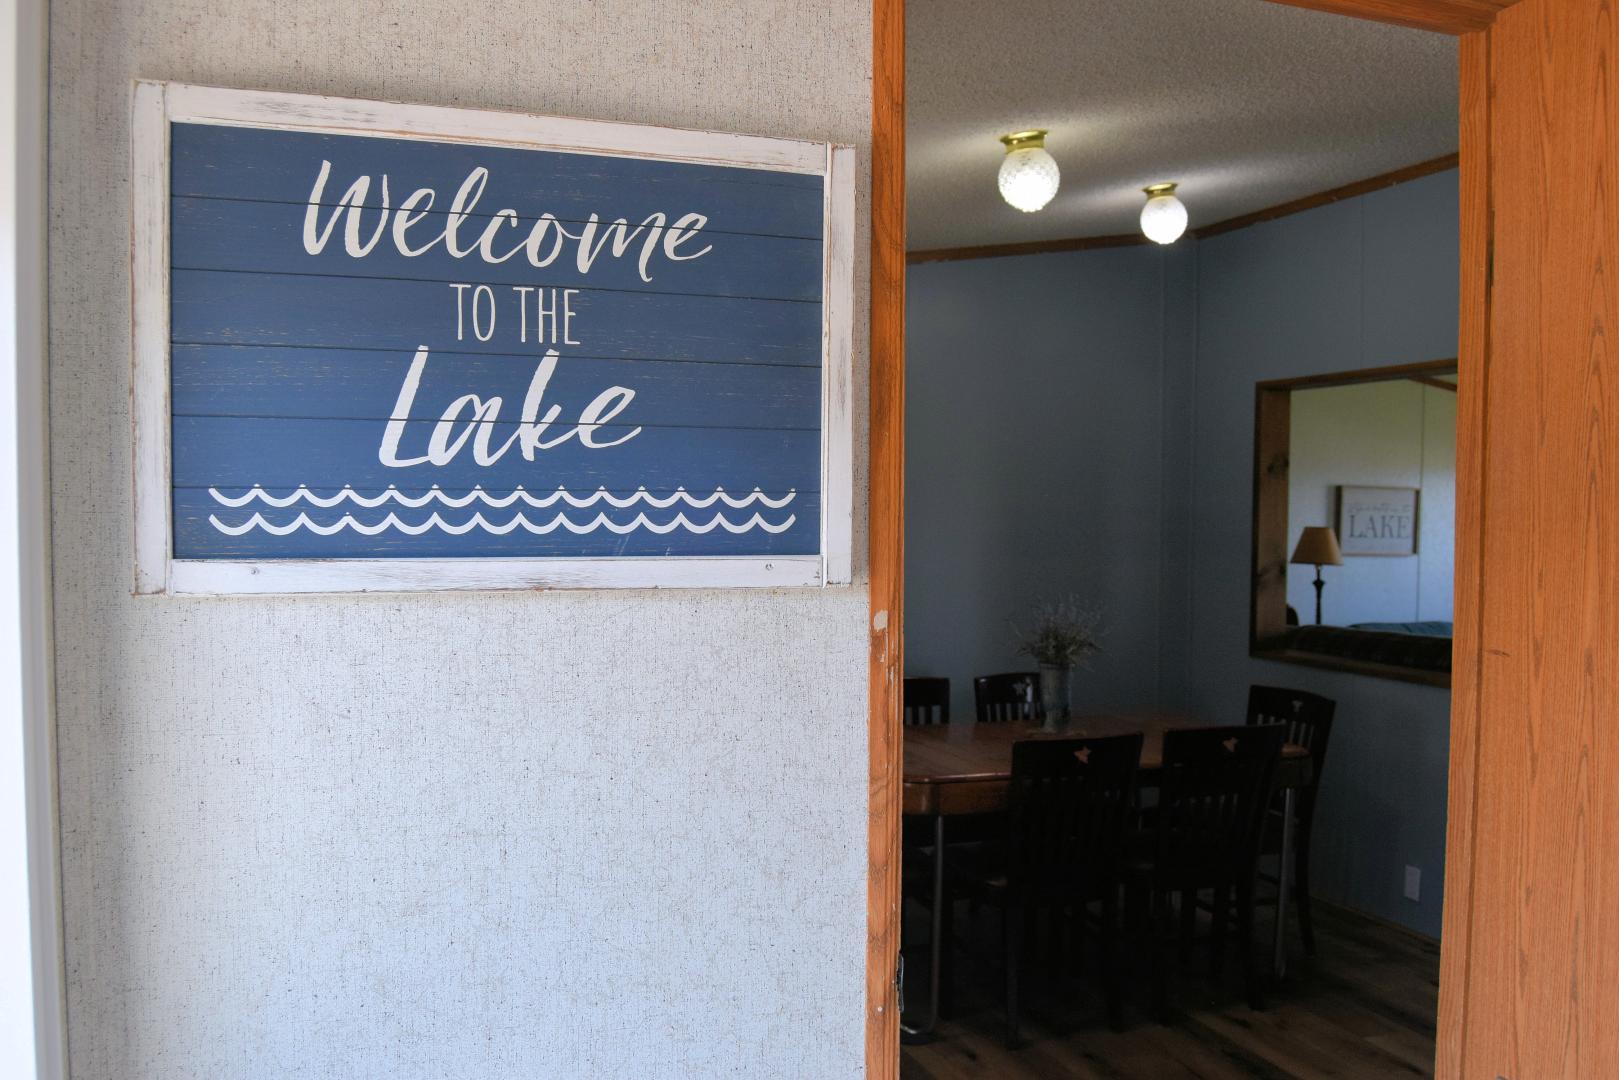 Interior view of cabin with sign saying "Welcome to the Lake"